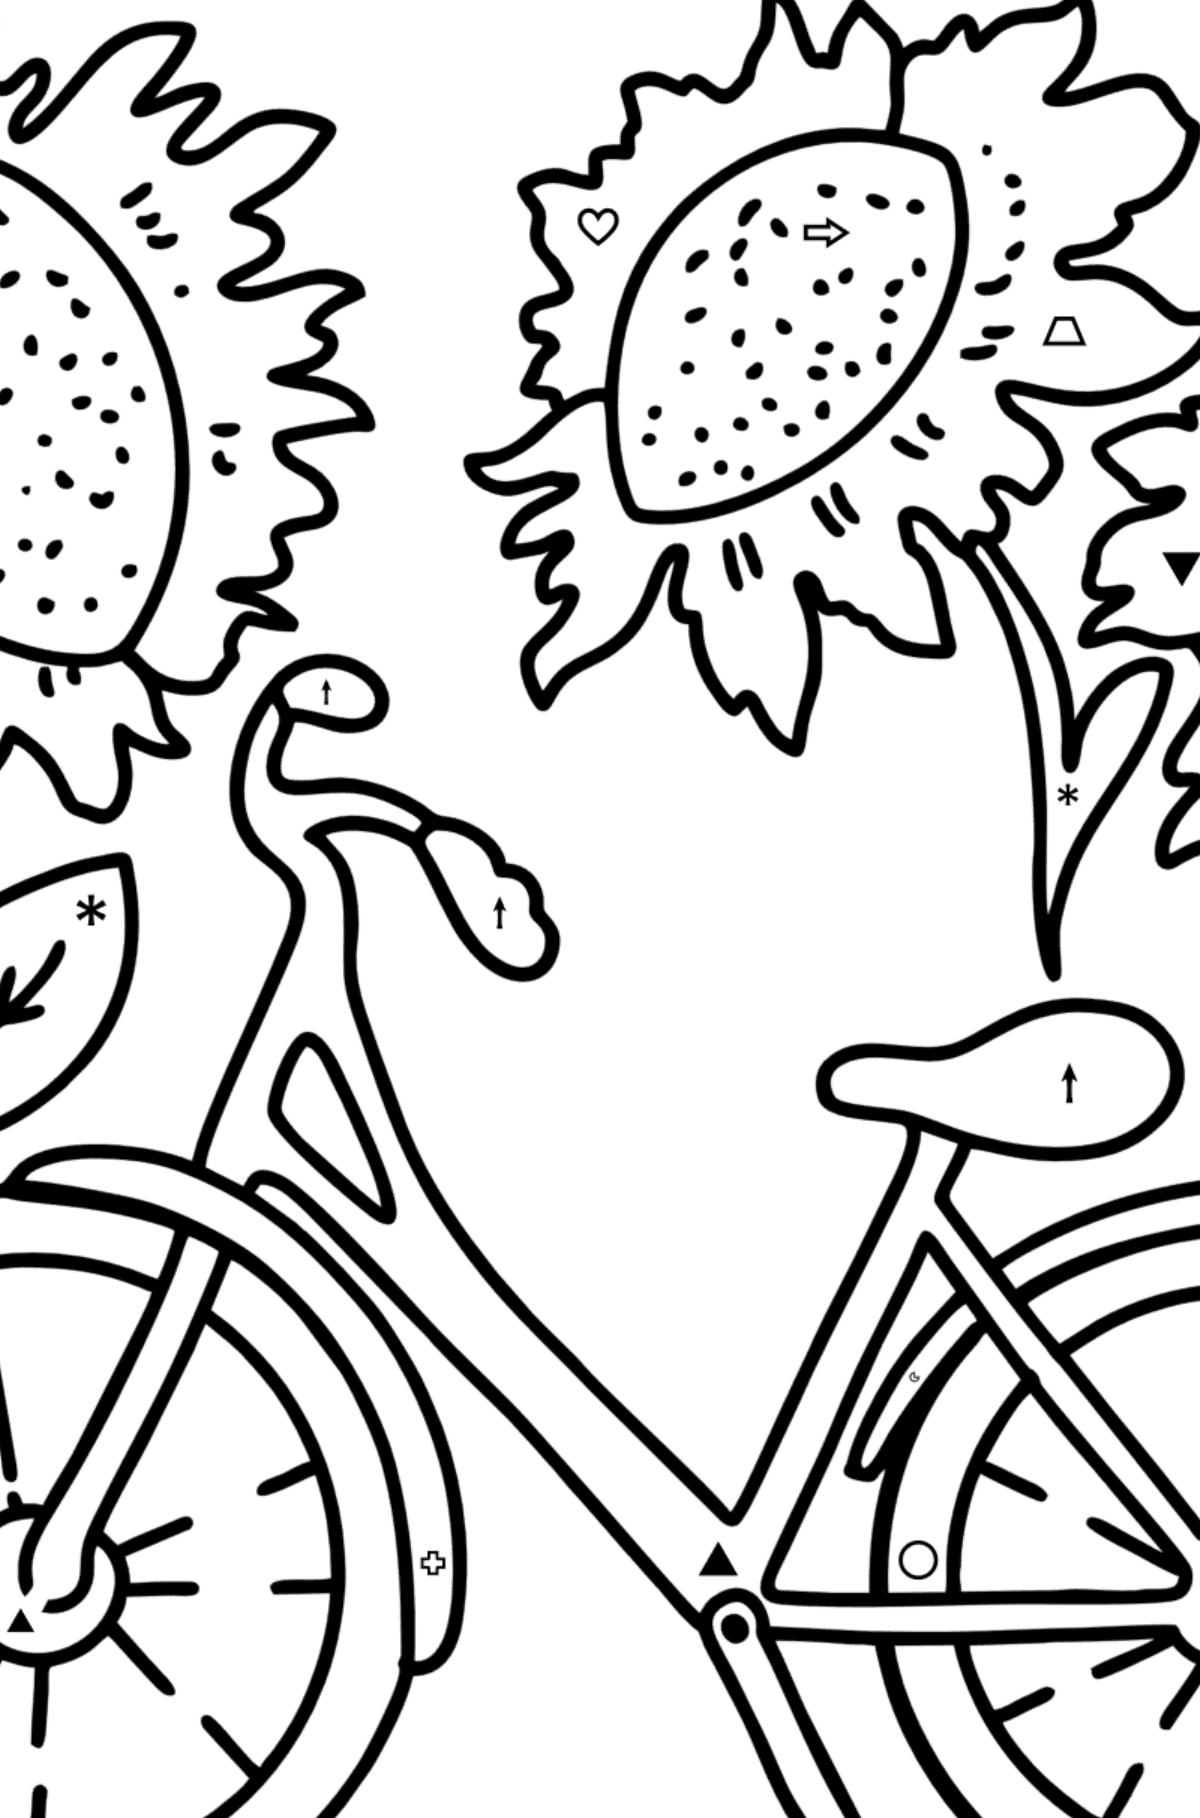 Summer Coloring page - Bicycle and Sunflowers - Coloring by Symbols and Geometric Shapes for Kids